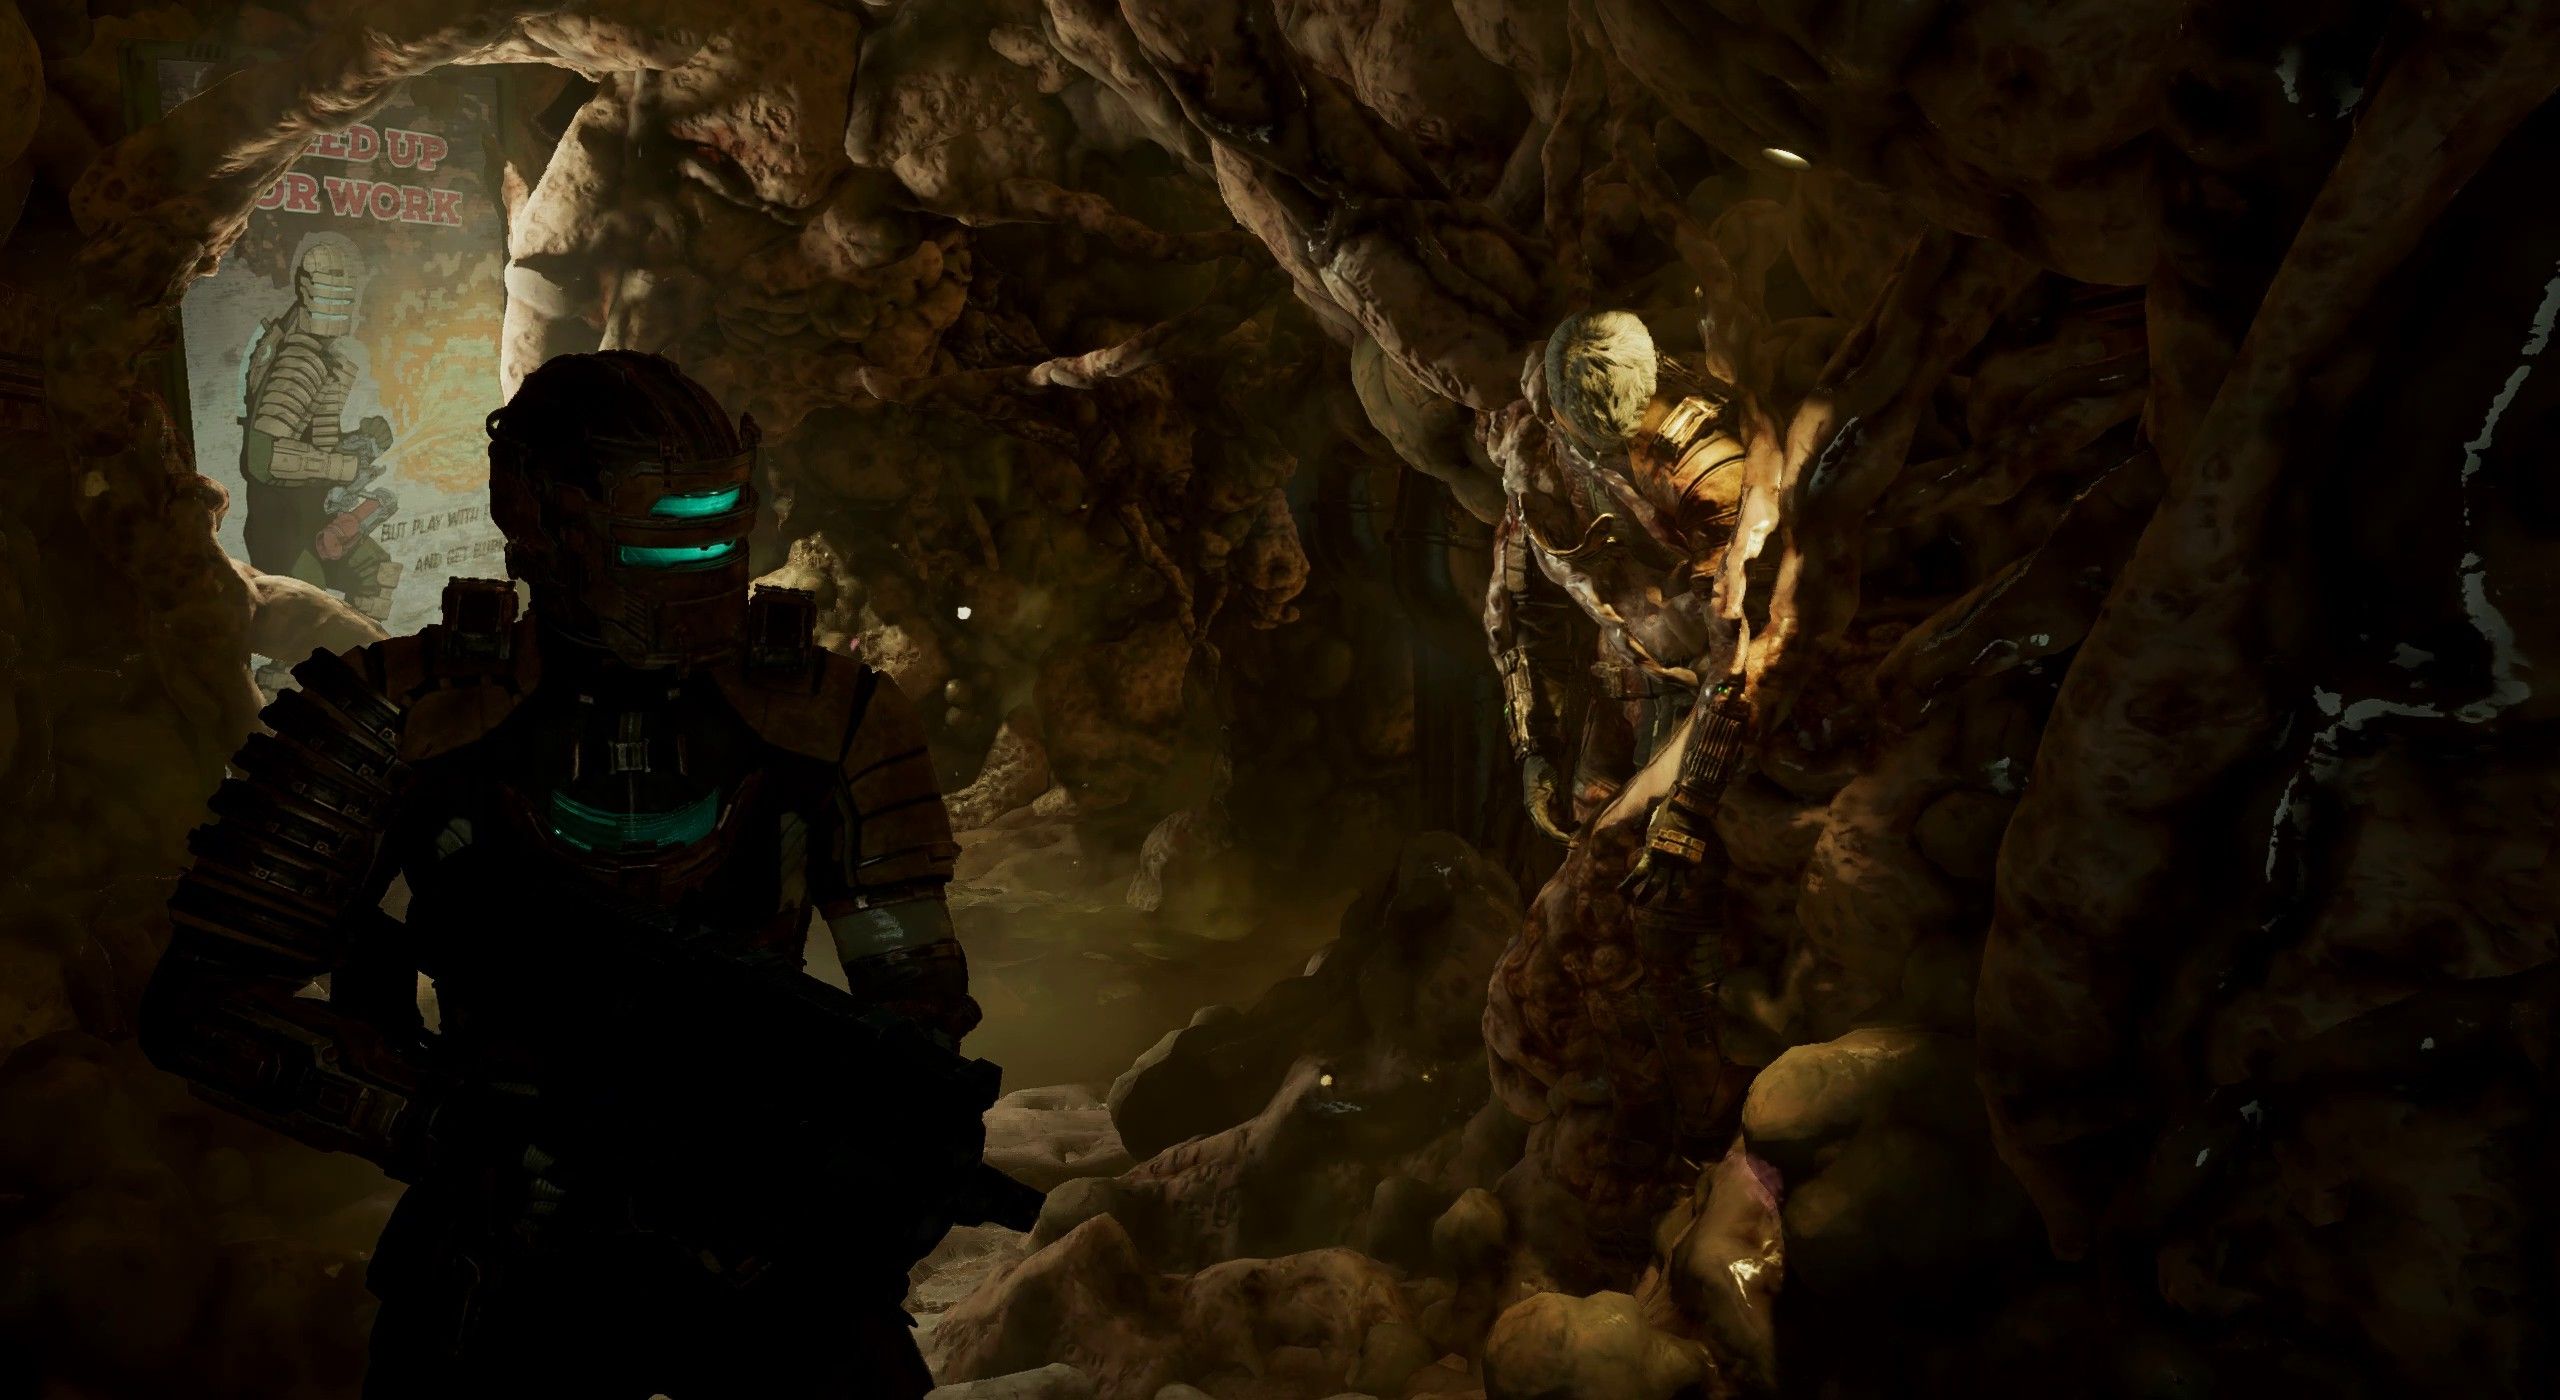 Isaac Clarke from the Dead Space remake preview stands with a flamethrower in front of a mangled body.